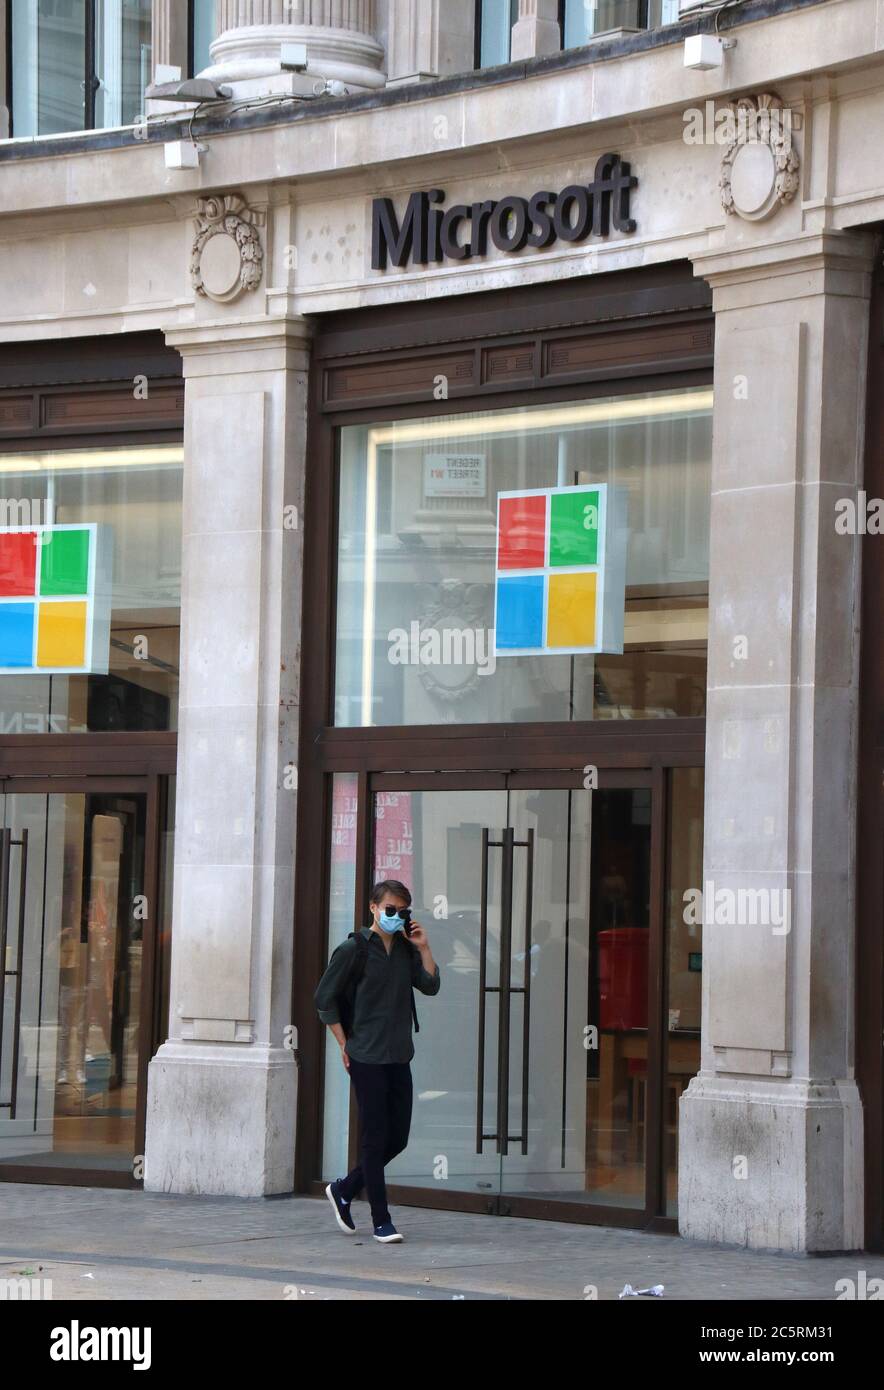 London, UK. 03rd July, 2020. A man walks past the Microsoft store.Microsoft has said it will keep all of its retail locations closed permanently, including London's Flagship store in Oxford Circus which opened just one year ago. The company says it will reimagine some of its spaces that serve its customers, including the Microsoft Experience Centre in London. Credit: SOPA Images Limited/Alamy Live News Stock Photo